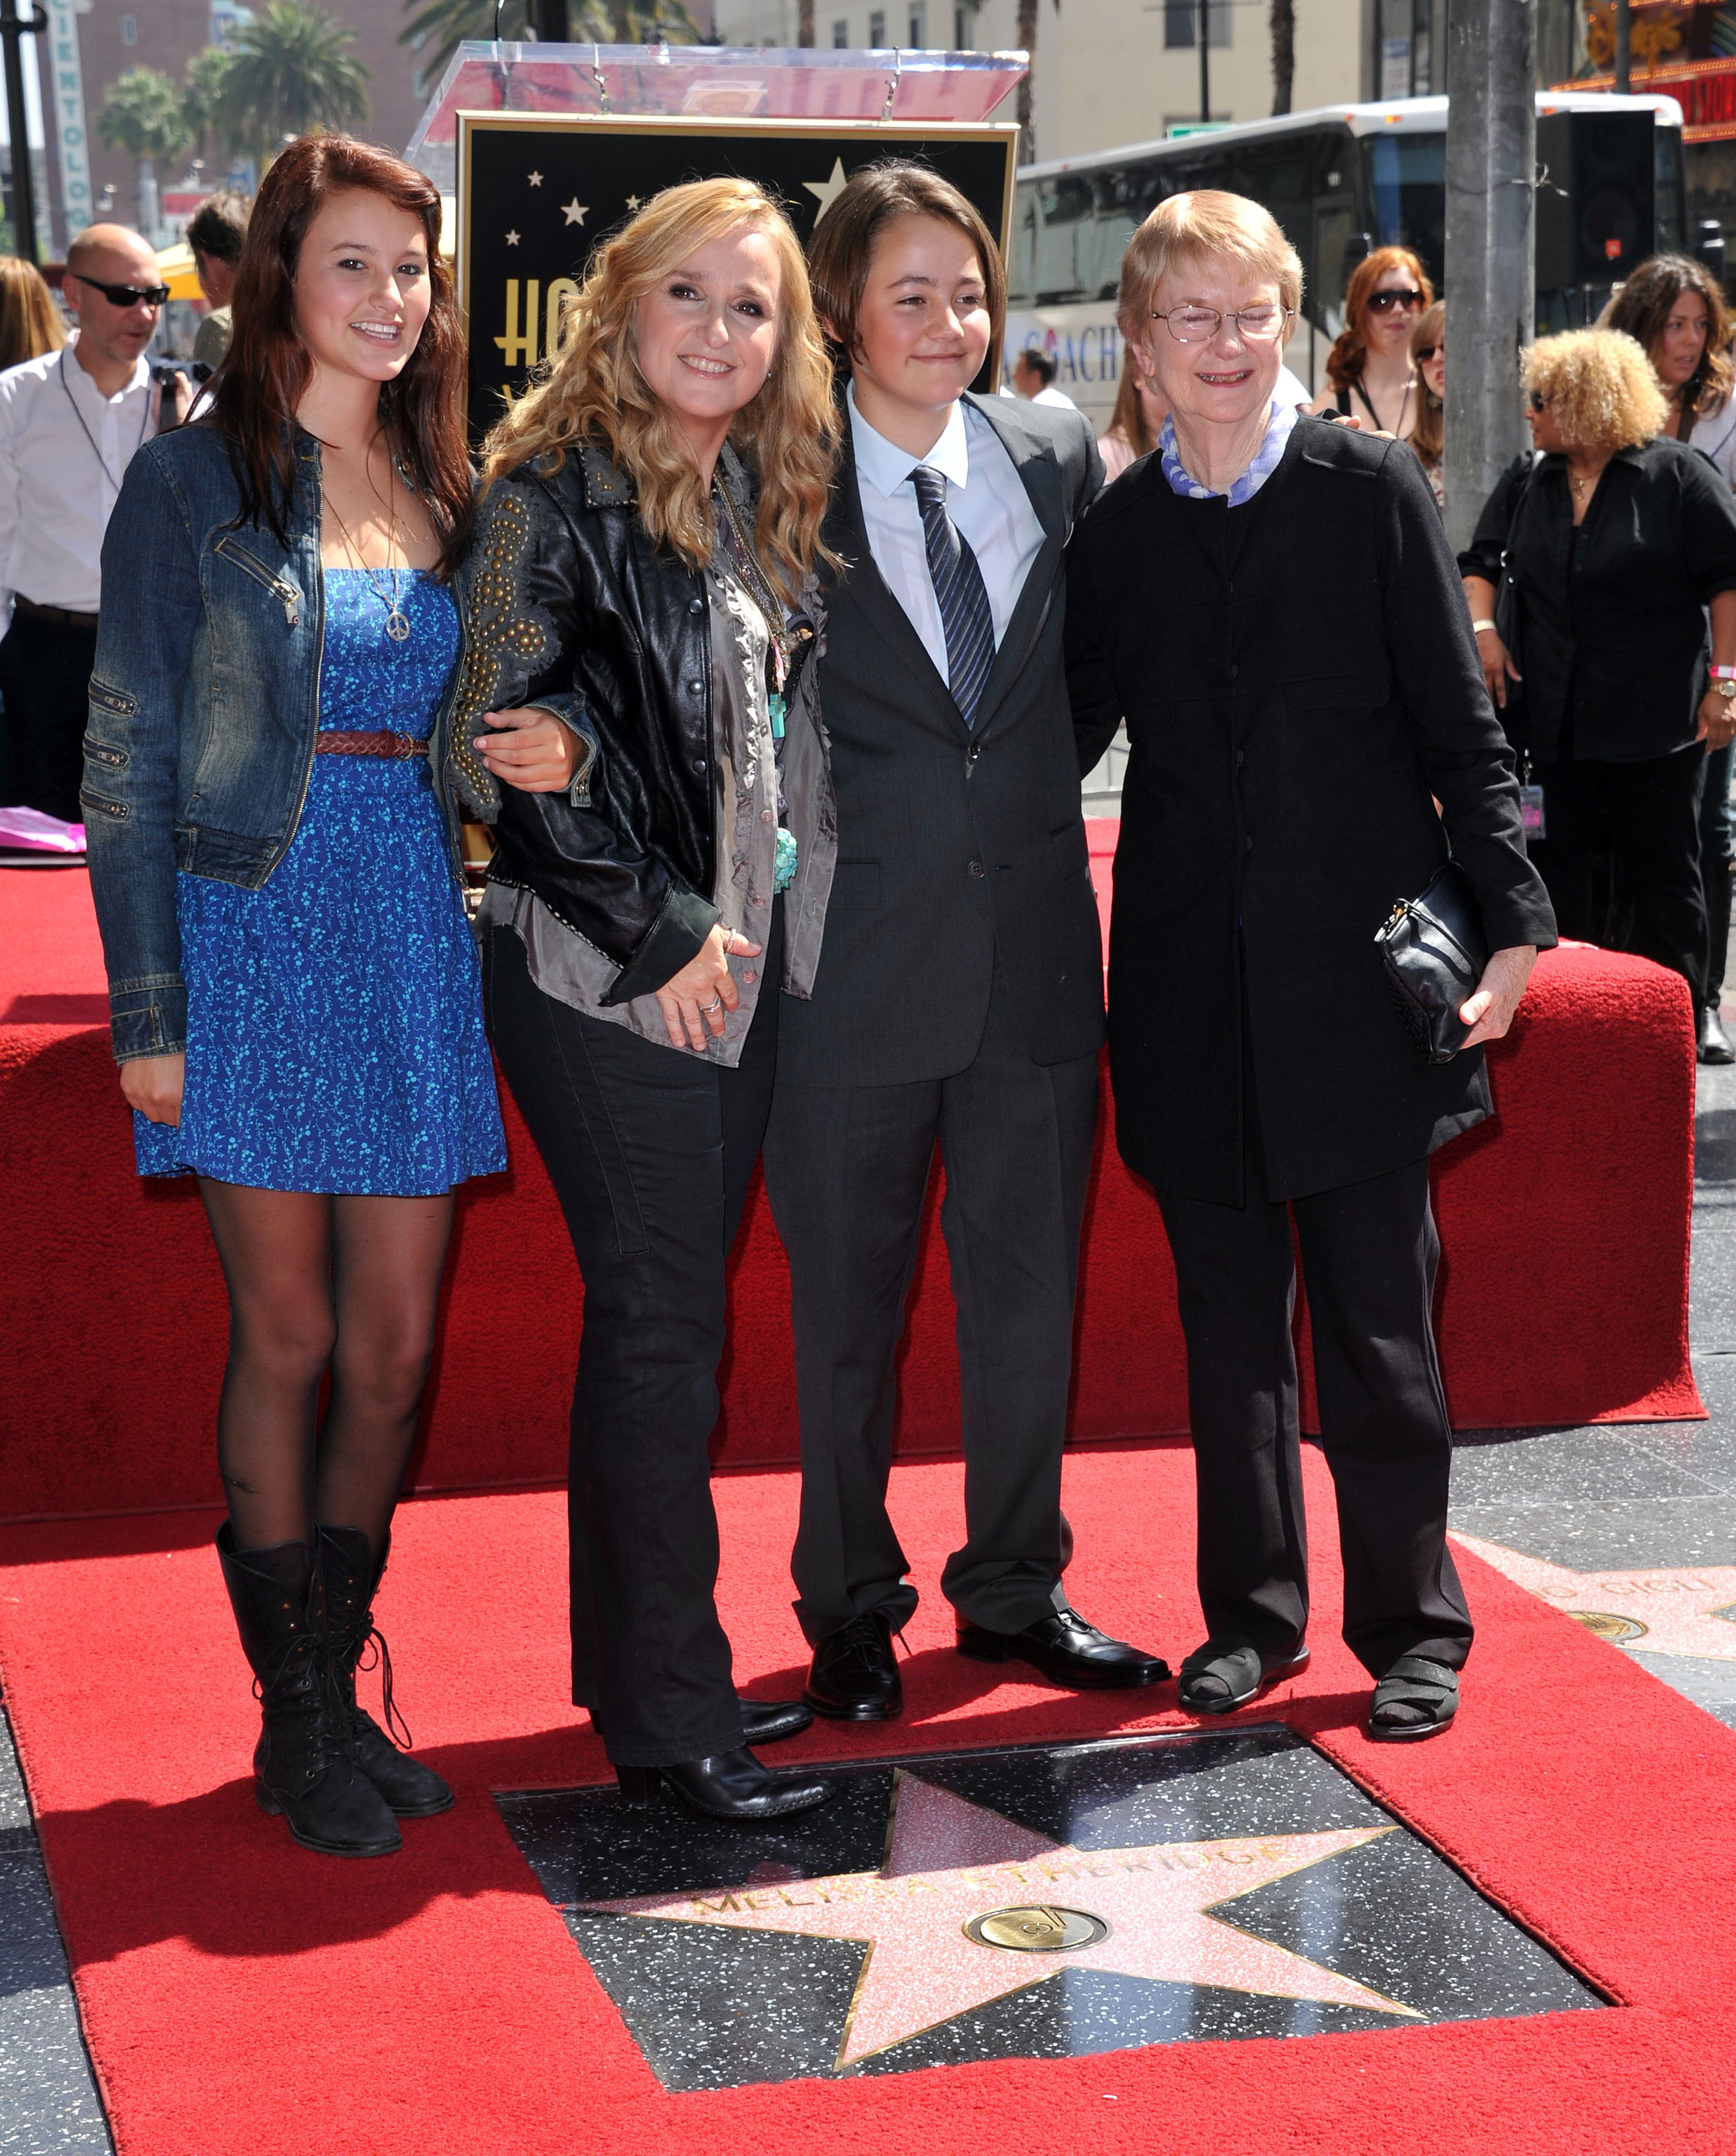 Melissa Etheridge with daughter Bailey, son Beckett, and mother Edna, posing during her Walk of Fame ceremony held at the Hard Rock Cafe in Hollywood on September 27, 2011 | Source: Getty Images